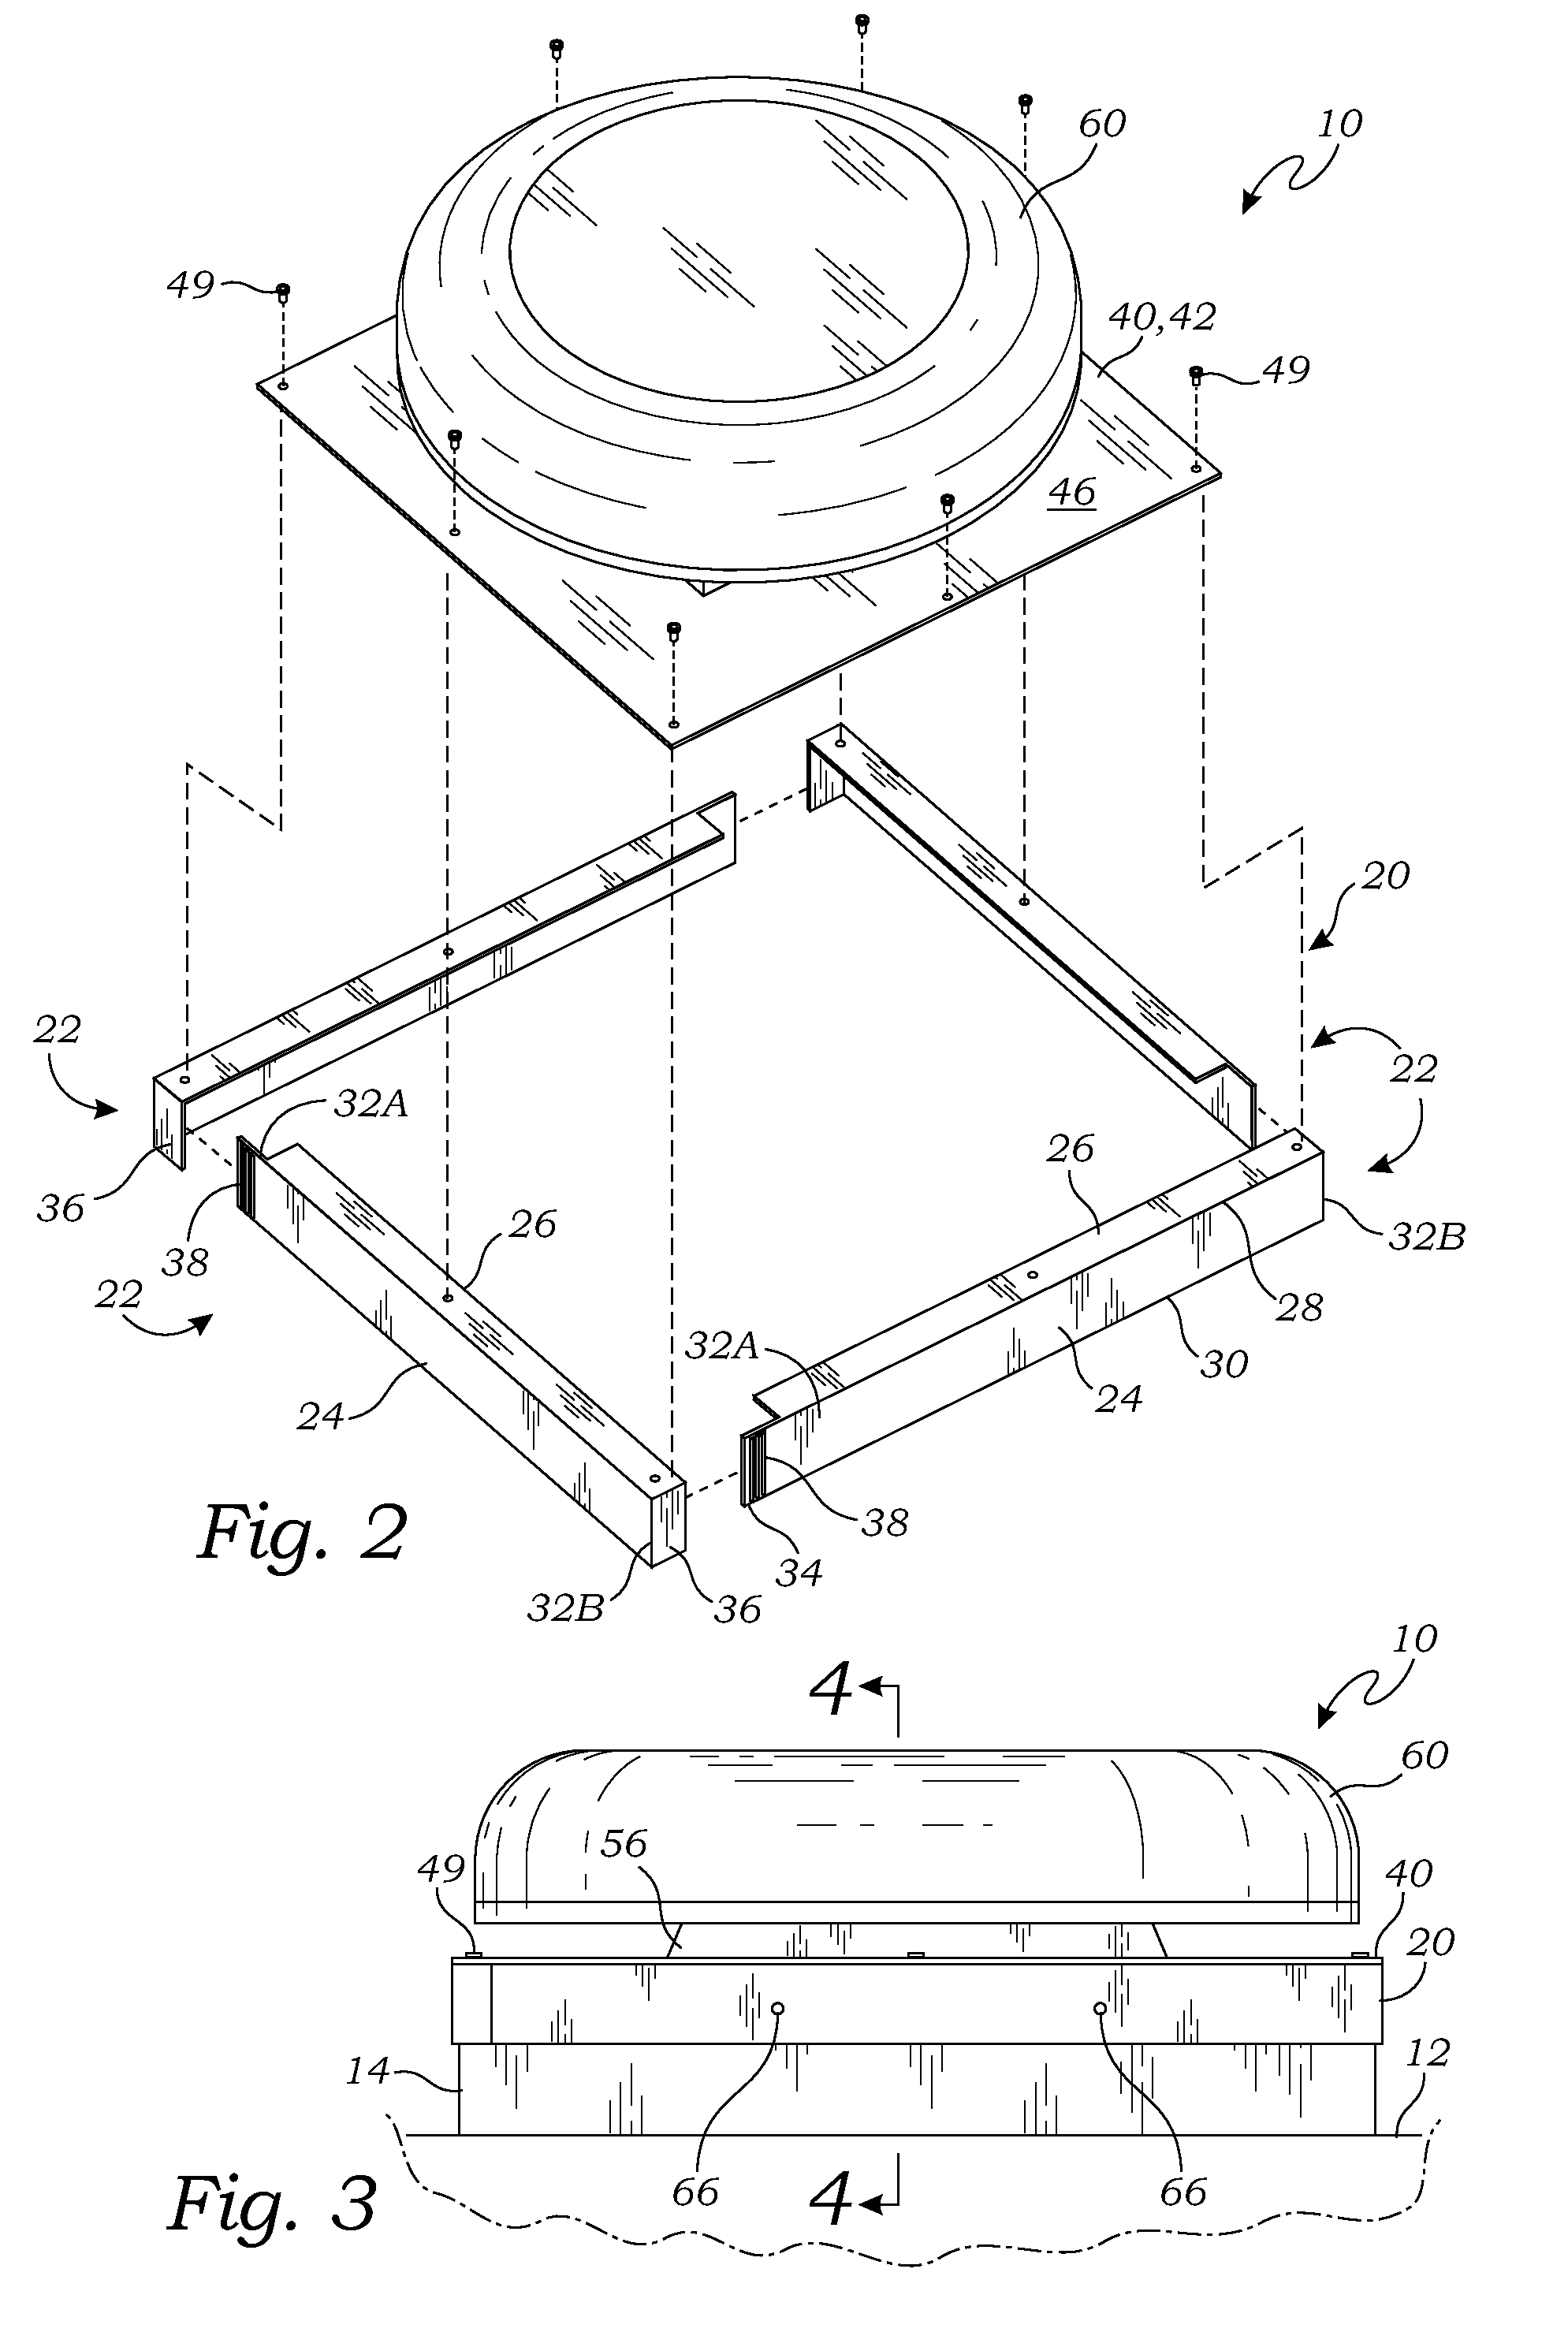 Method for installing a roof vent